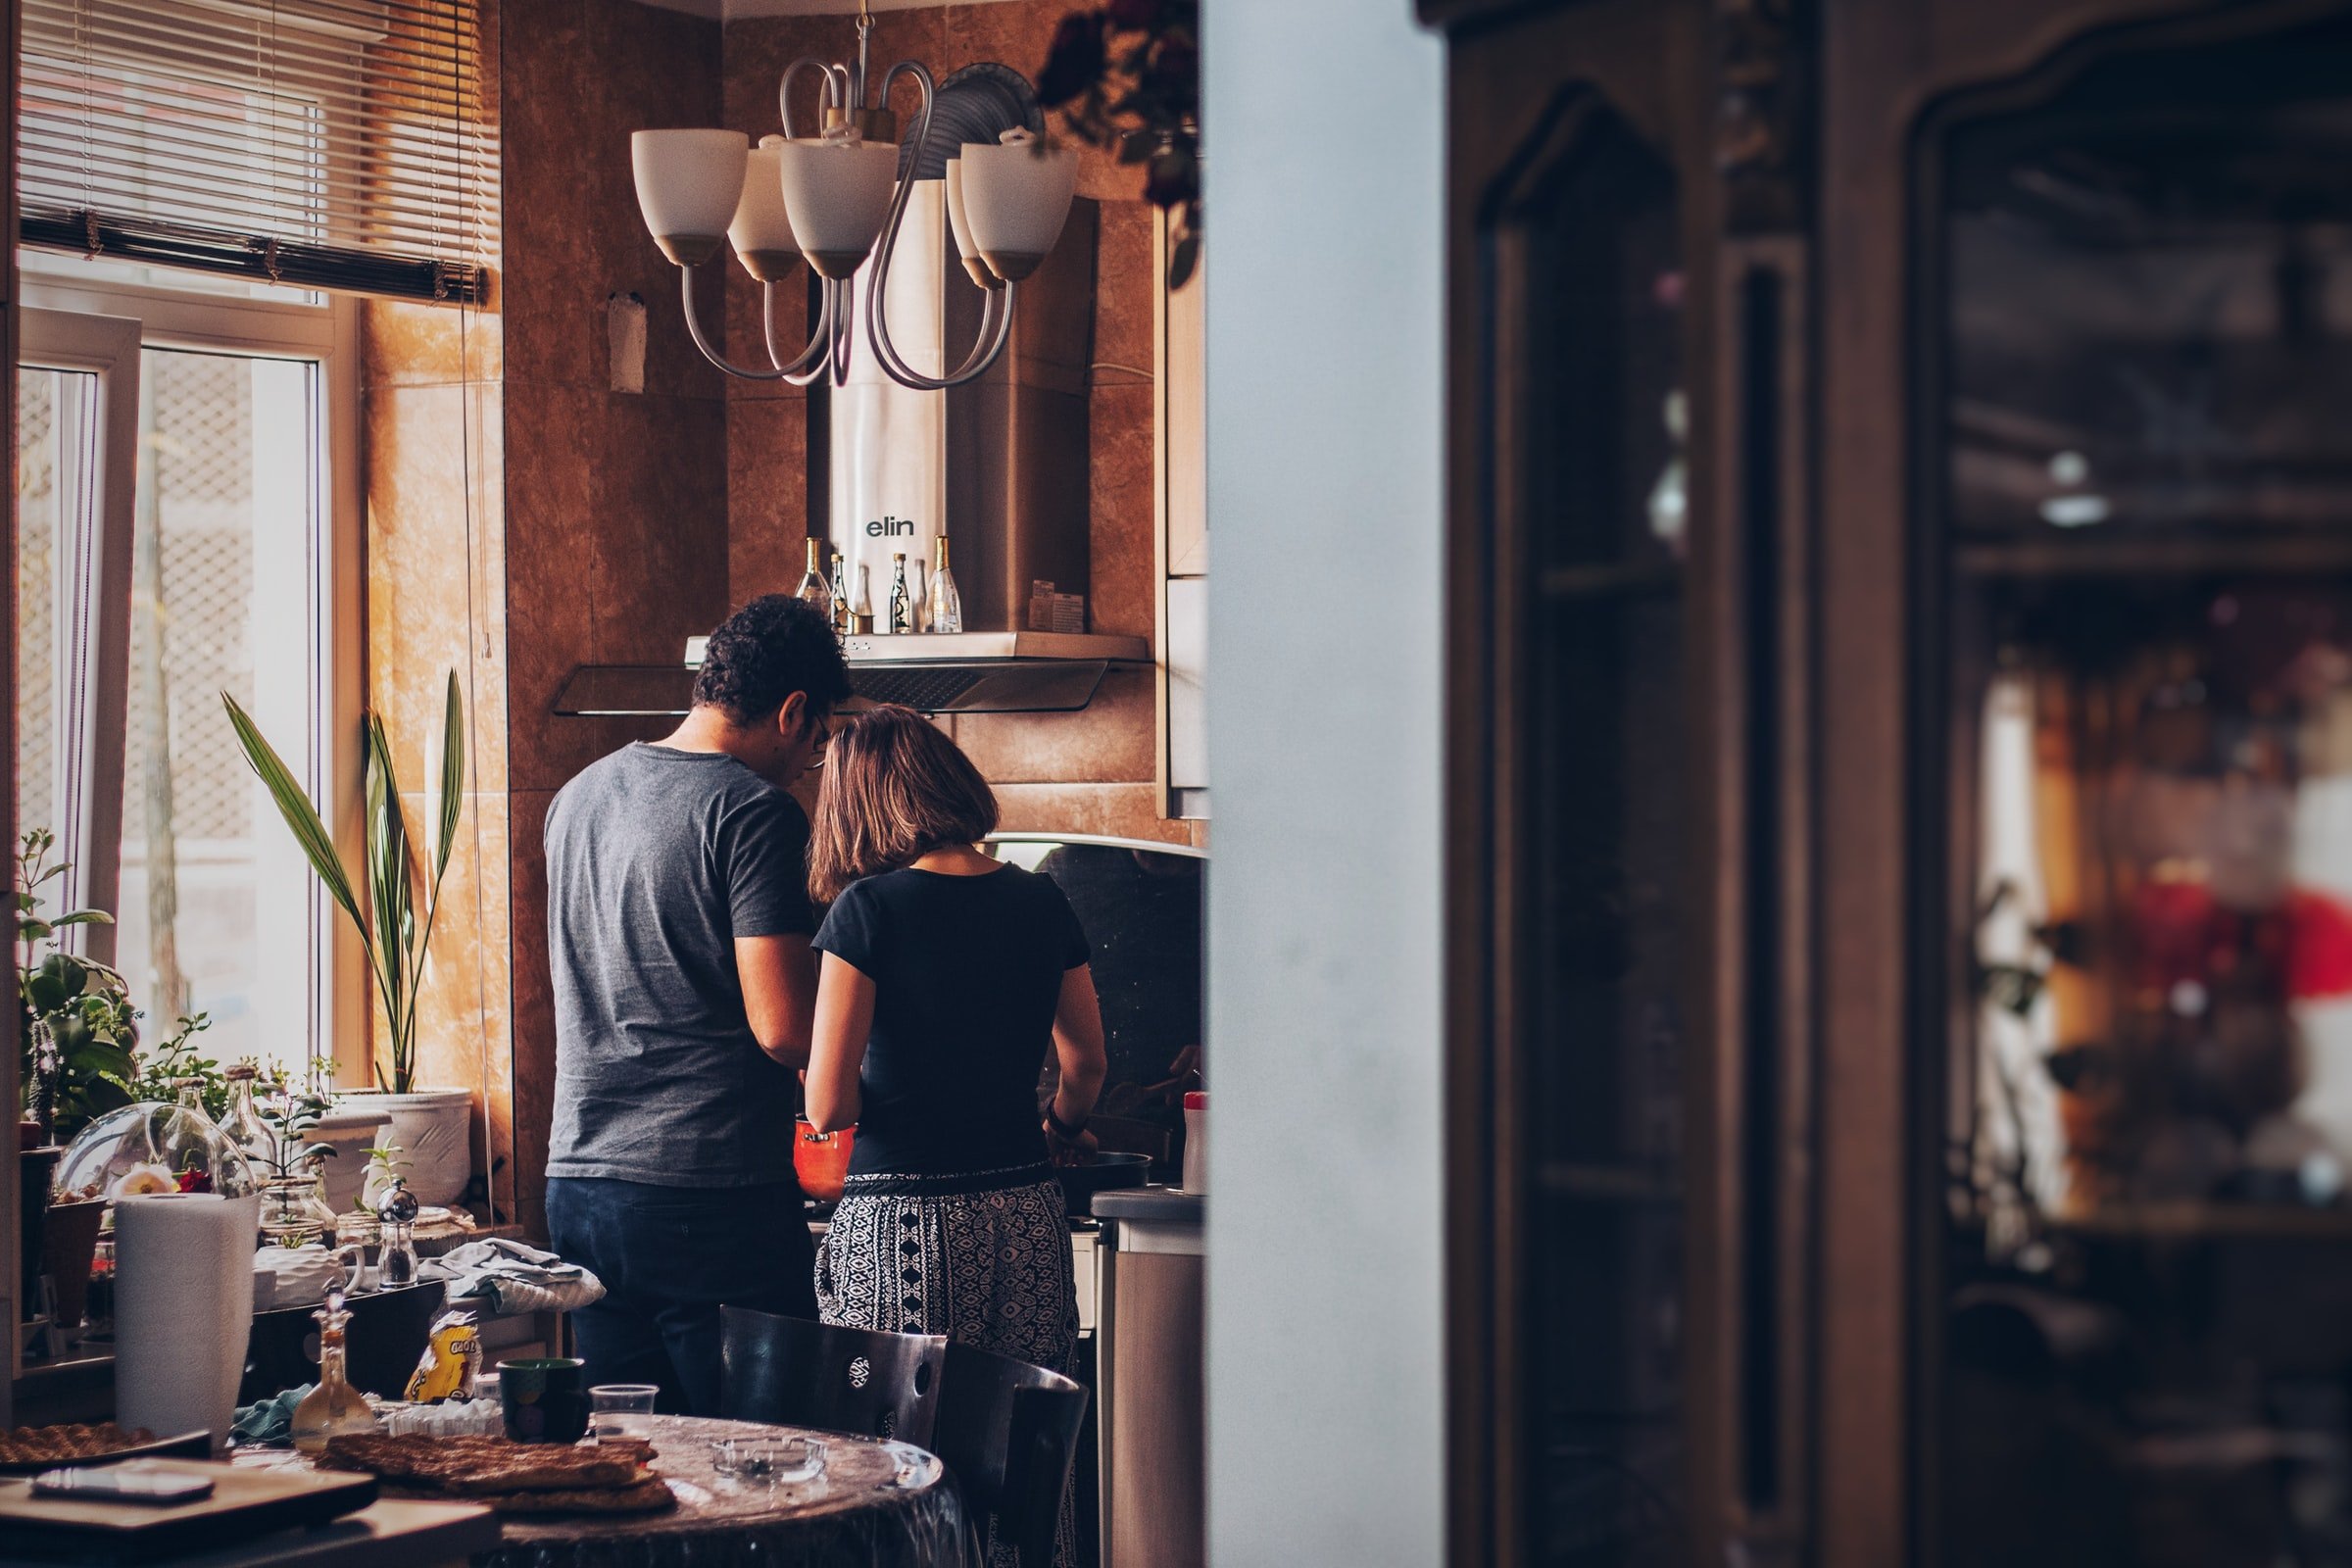 Couple working in the kitchen. | Source: Unsplash